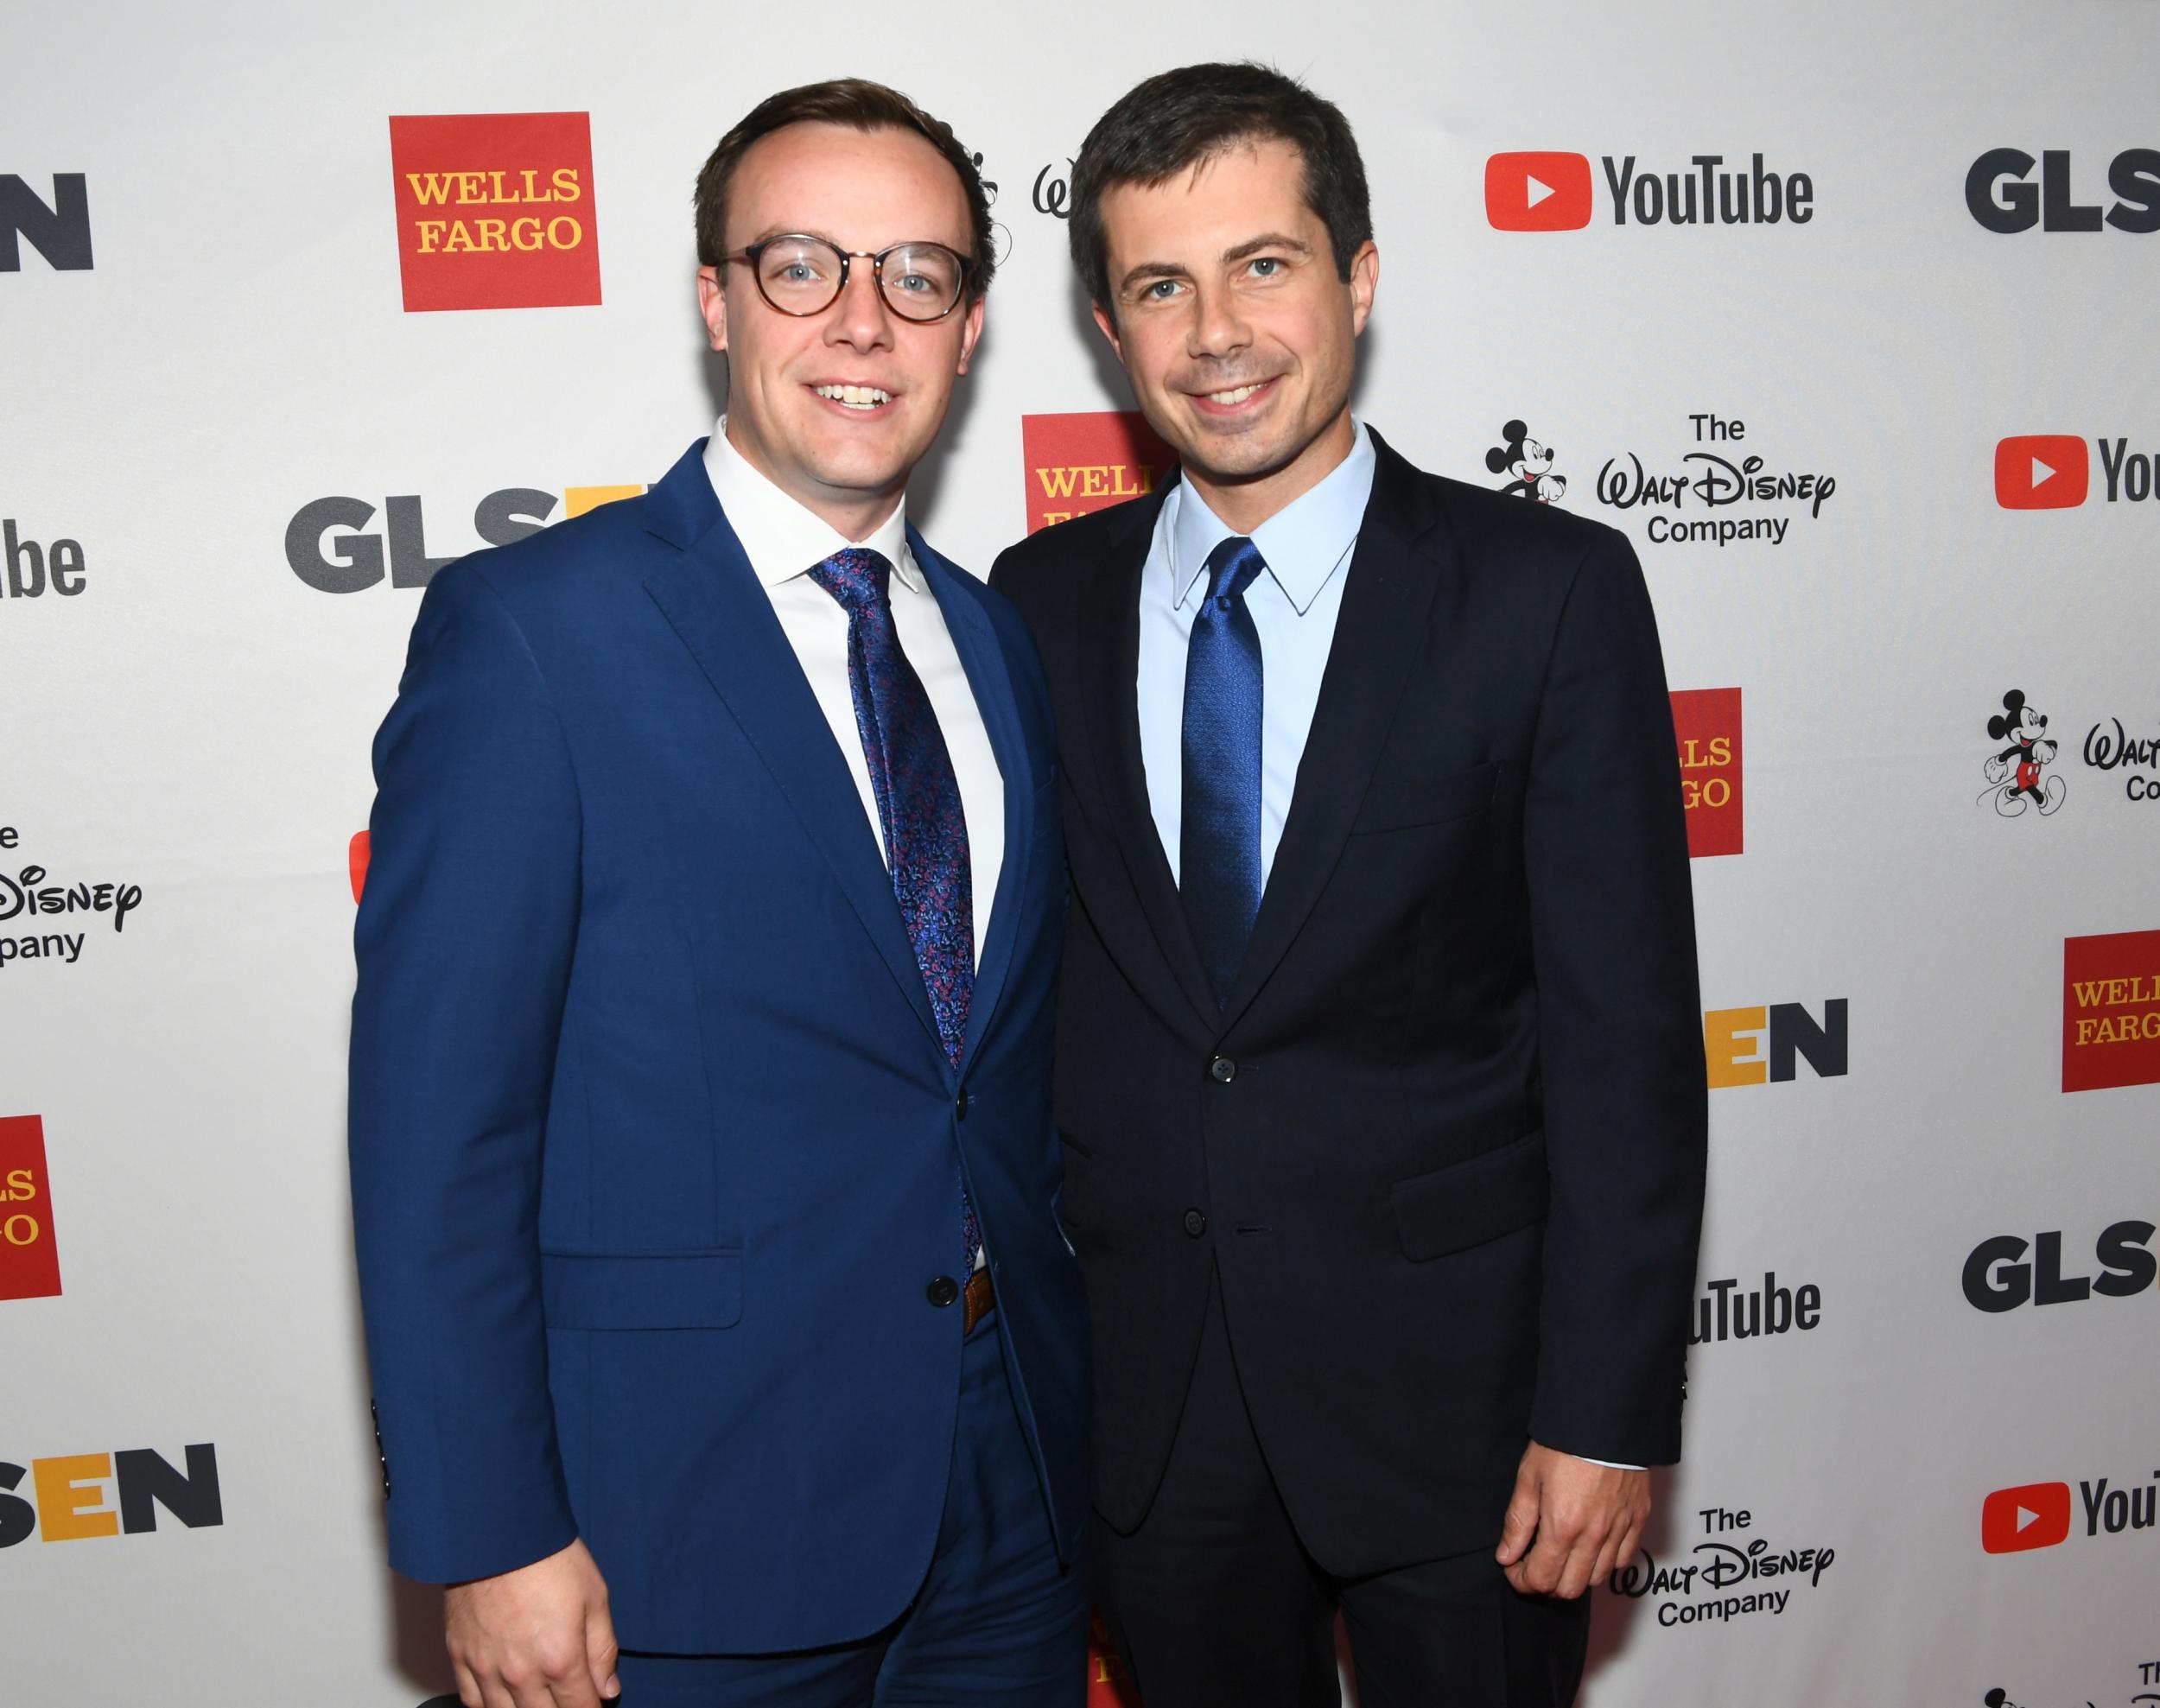 Chasten Glezman (L), and Mayor Peter Buttigieg at the 2017 GLSEN Respect Awards at the Beverly Wilshire Hotel on October 20, 2017 in Los Angeles, California